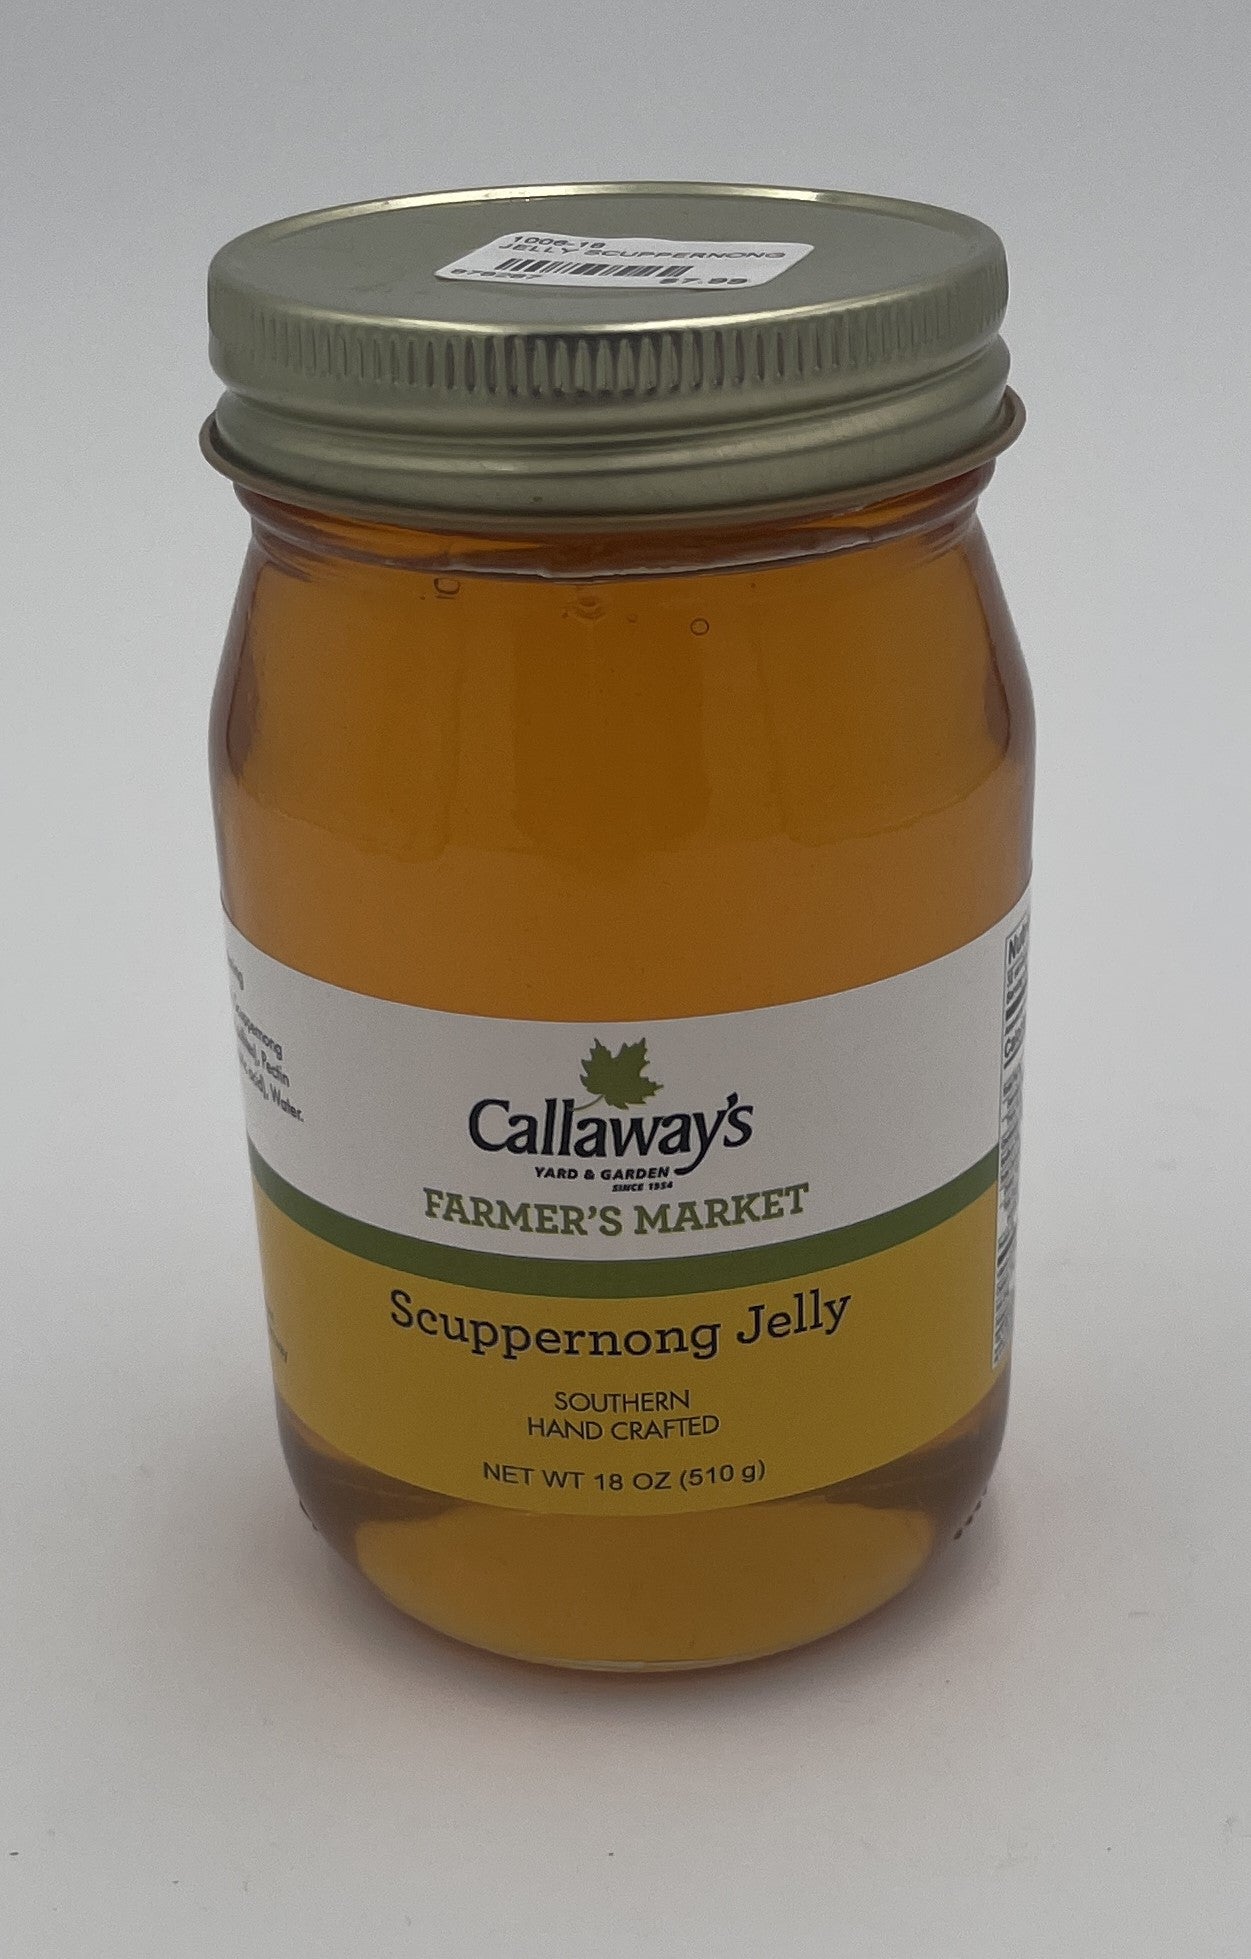 Jelly, Scuppernong Jelly